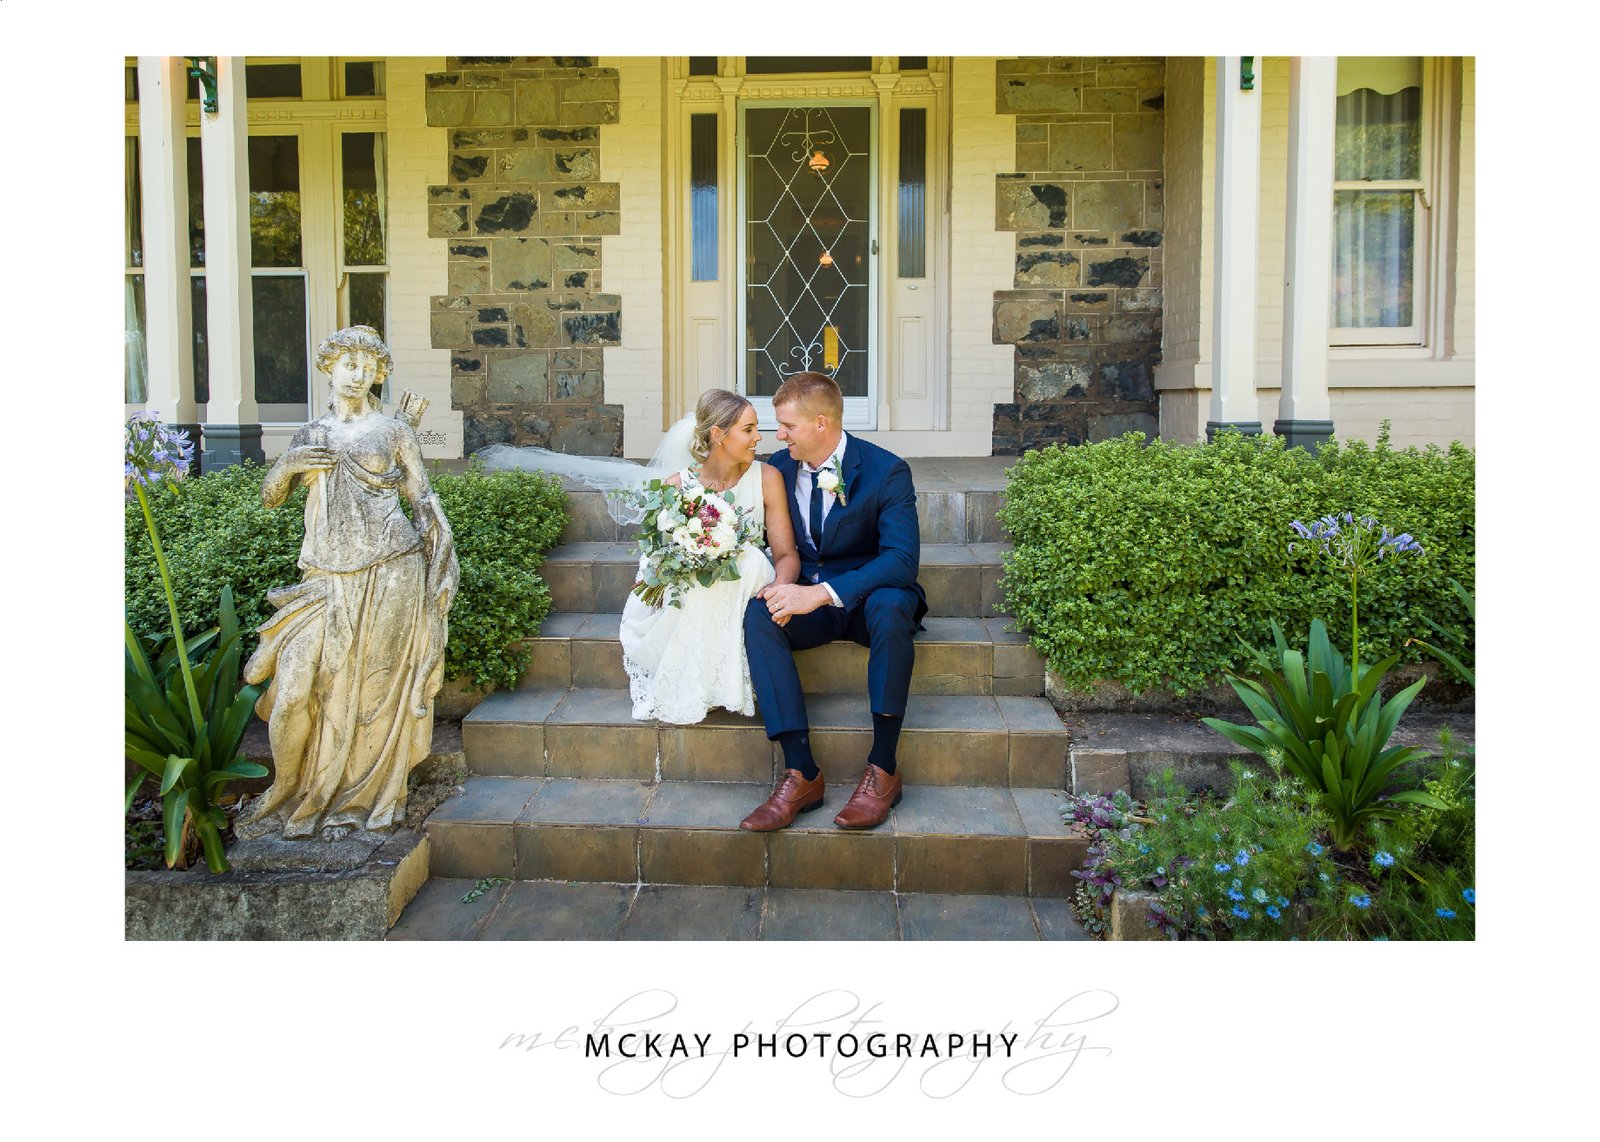 On the steps of the old homestead at Leeston wedding